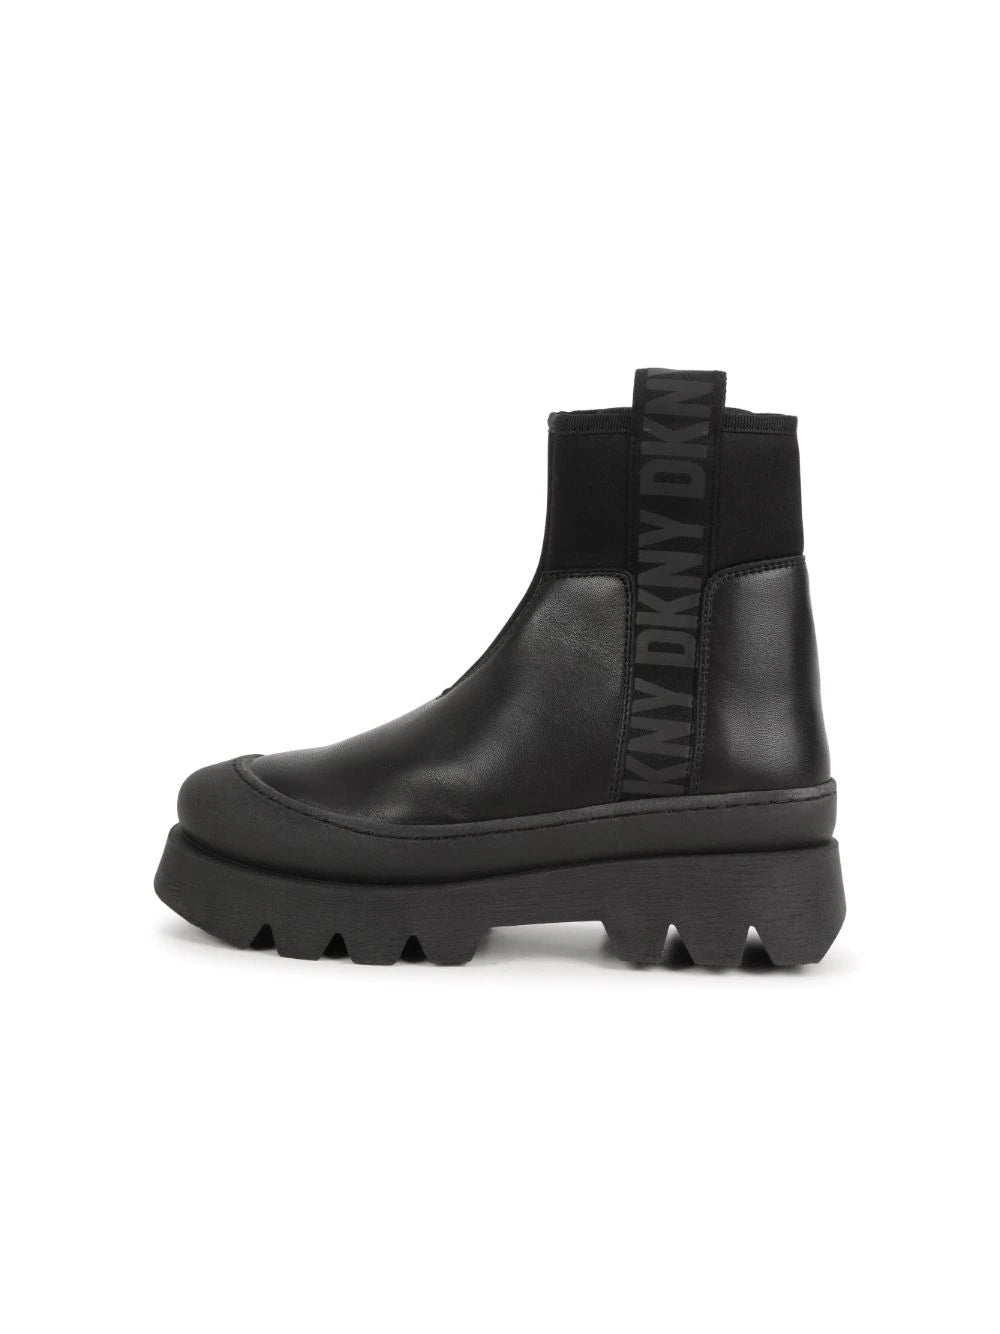 Dkny Kids logo-tape ankle boots